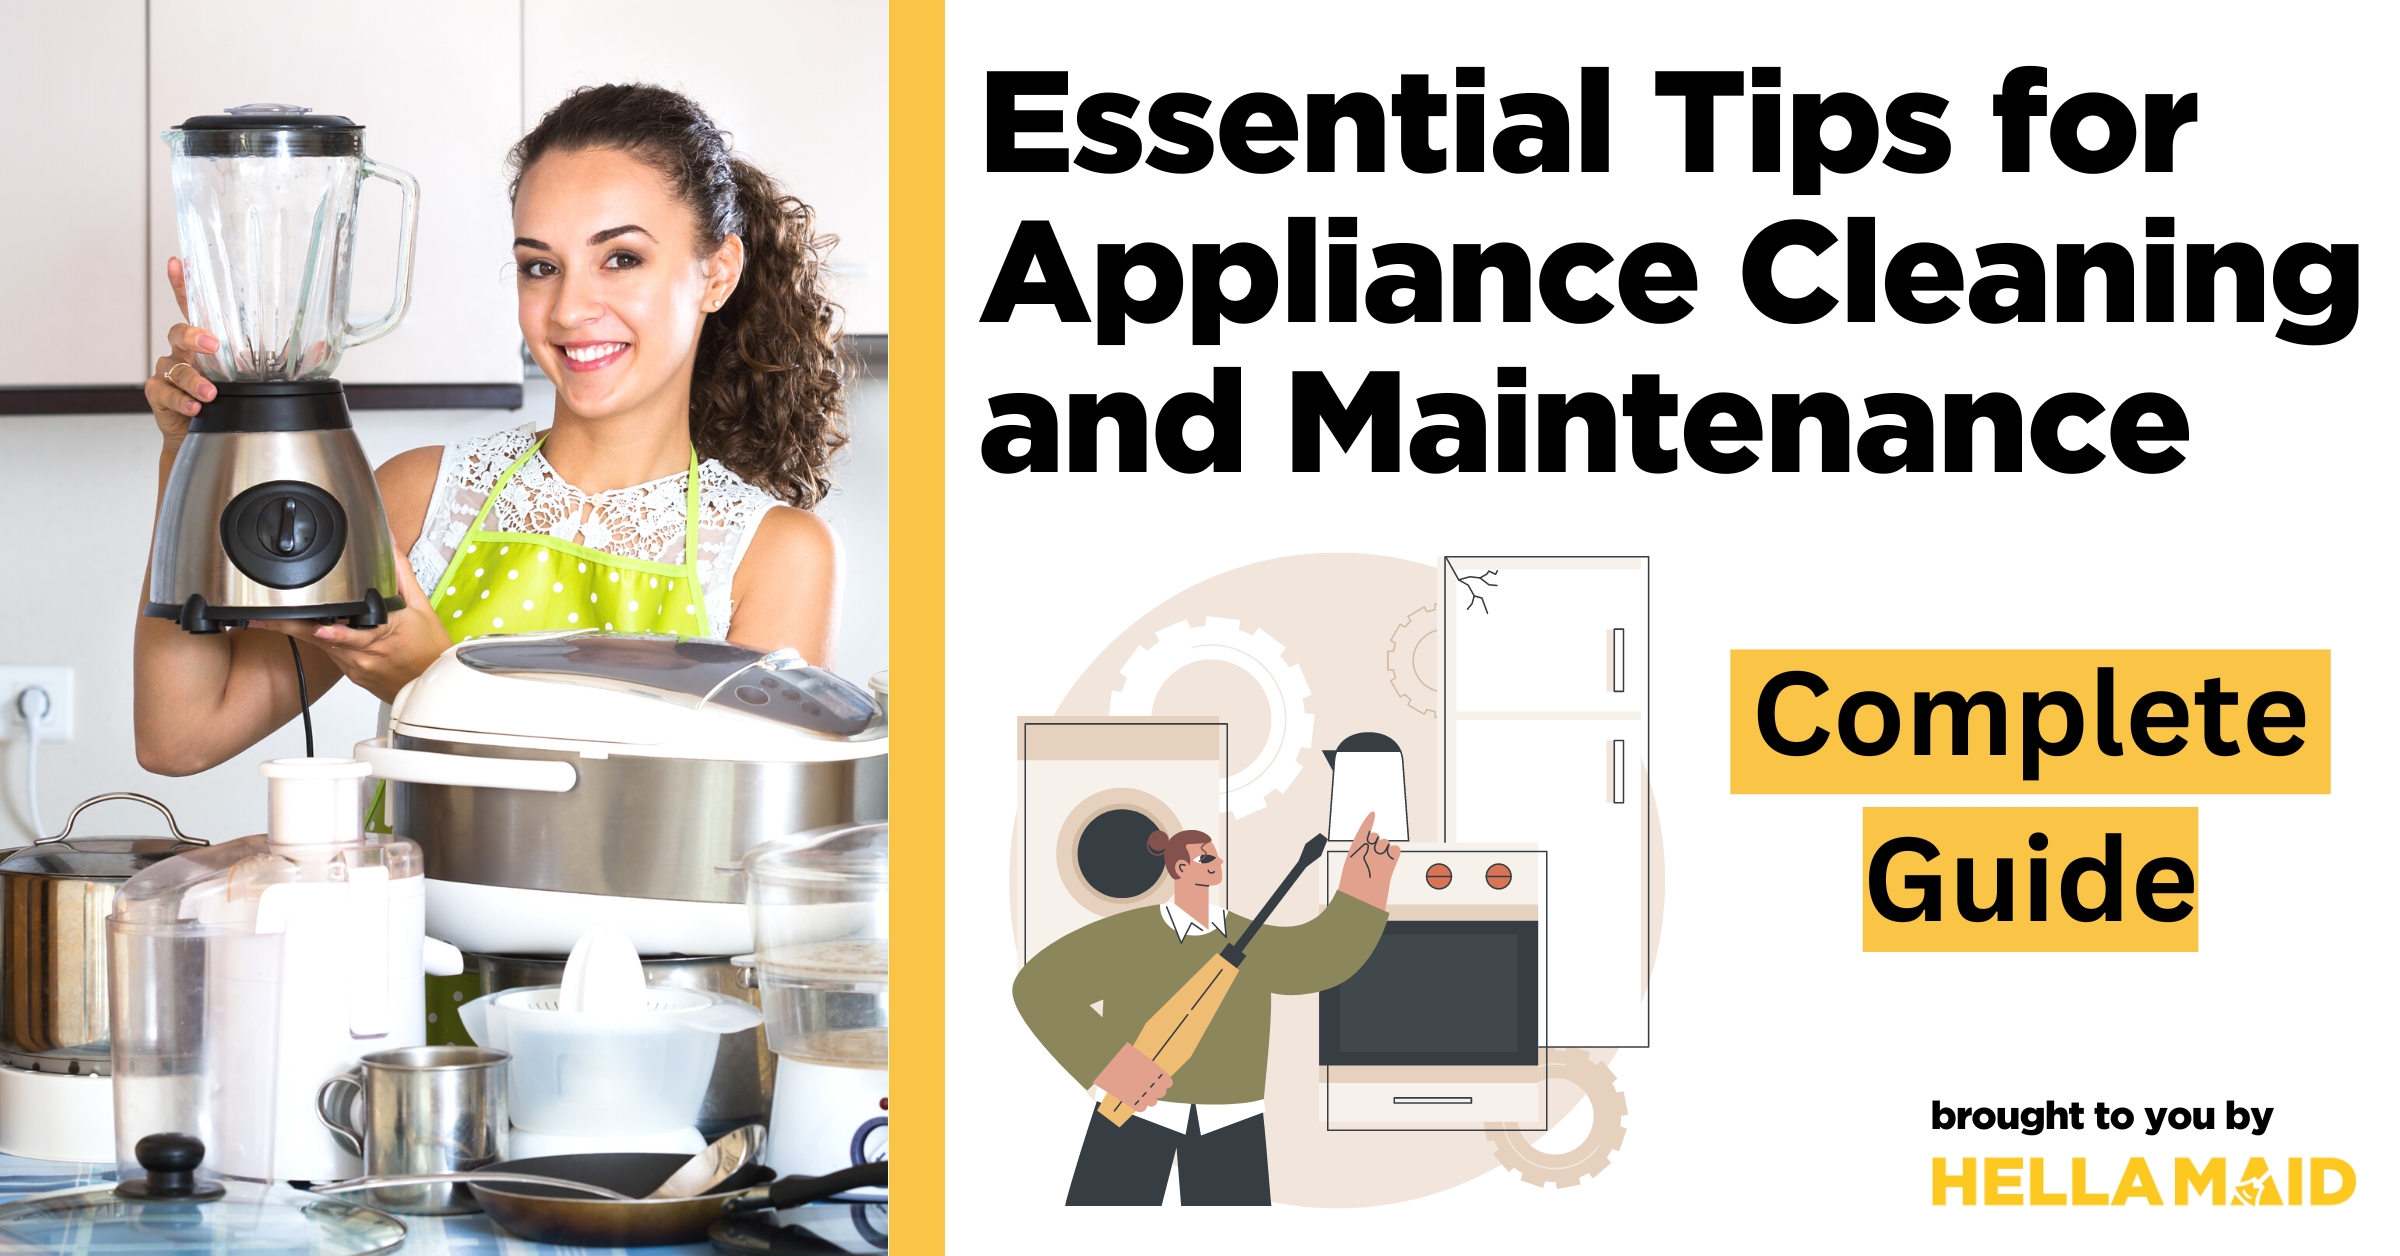 appliance cleaning and maintenance tips